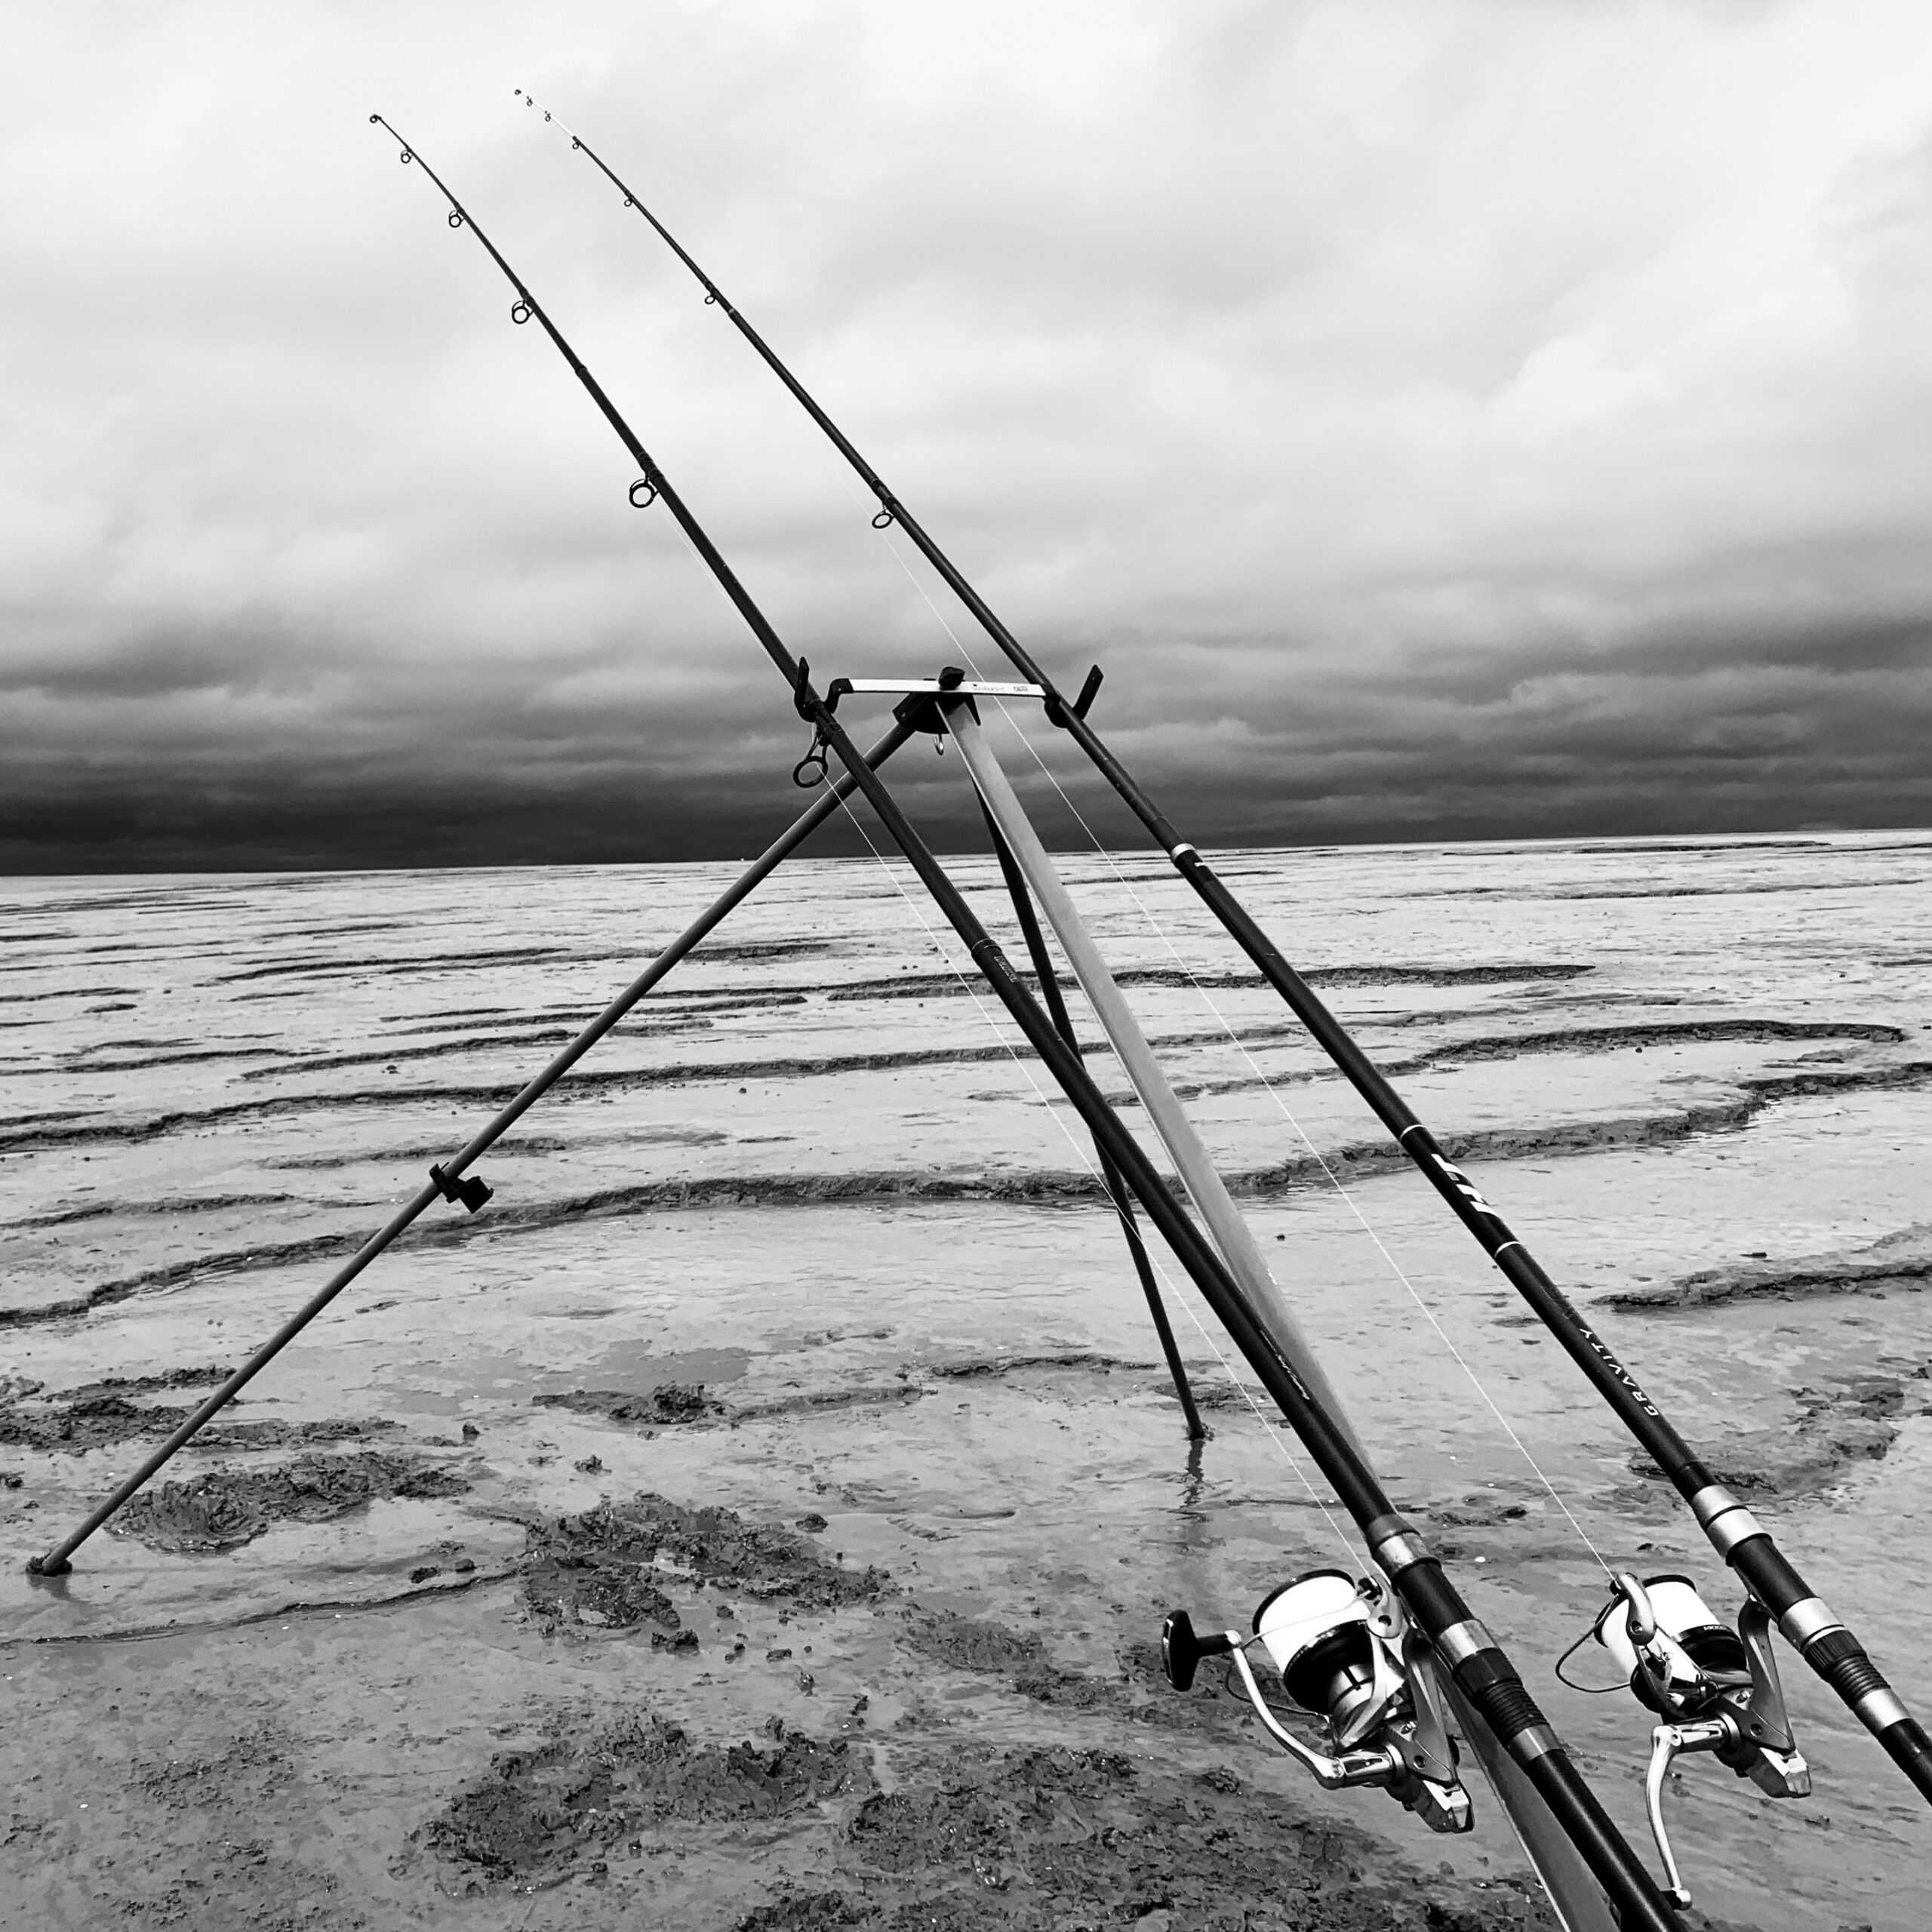 Beachcasting Rods  Which are the best?